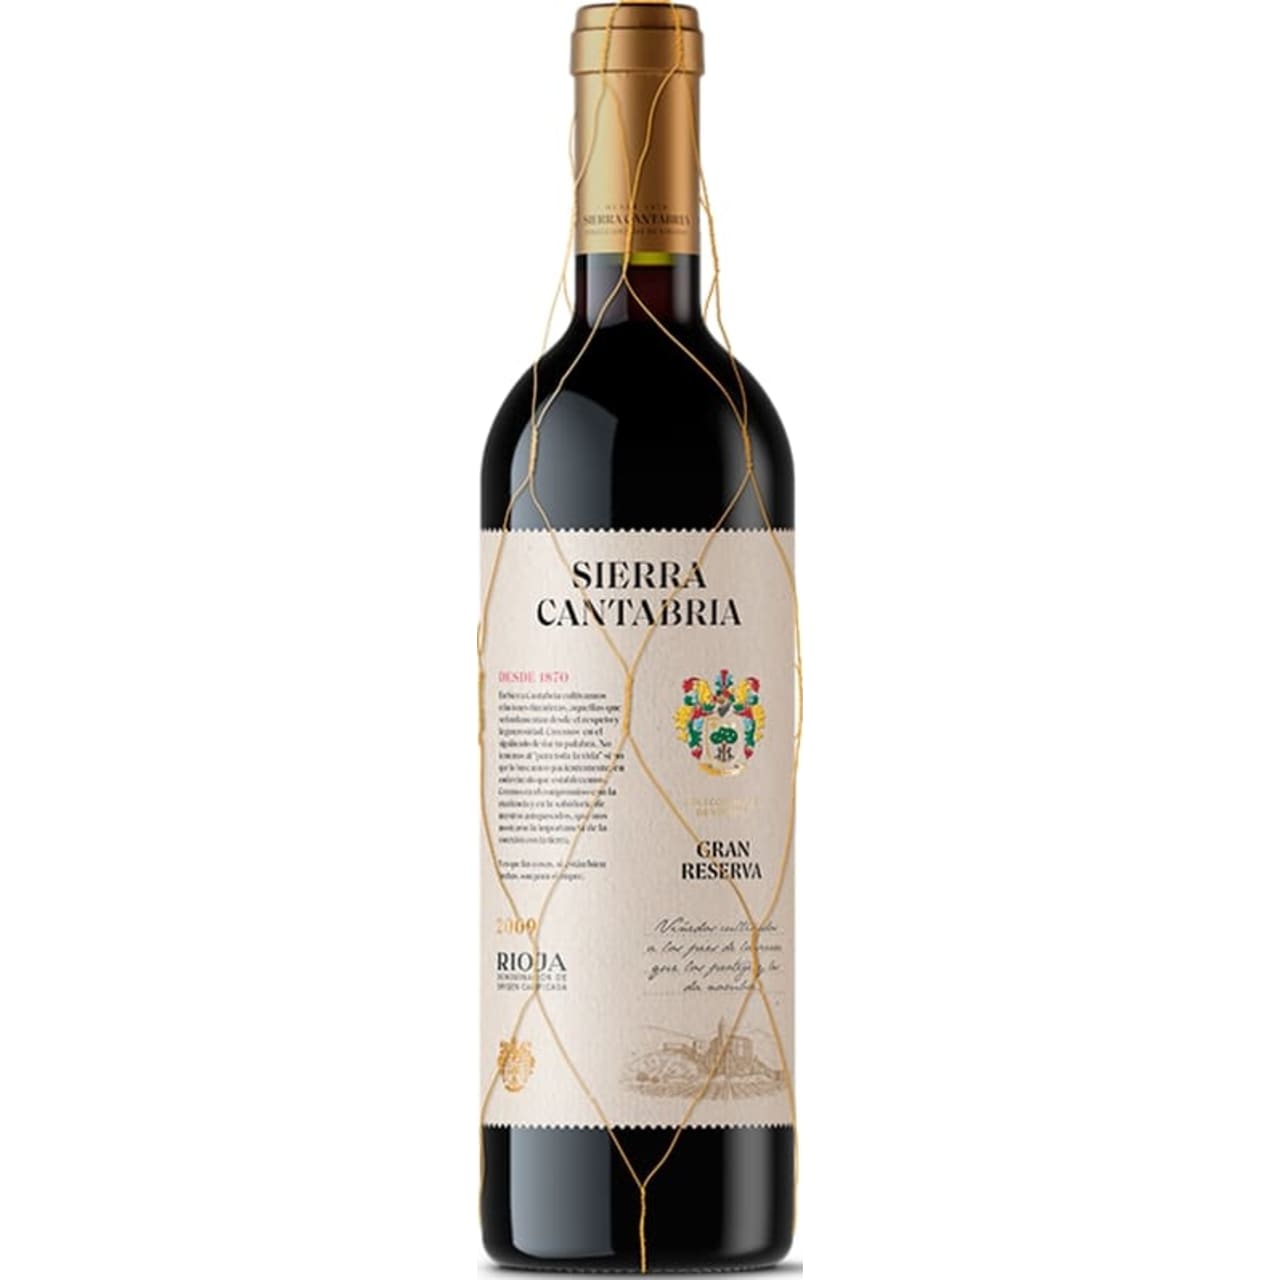 Colossally complex, sumptuous, beautifully mature Gran Reserva, with a fabulously intricate and inviting bouquet of vanilla, fig, dark chocolate, vanilla bean, black truffle and autumn leaves. Superb length on the palate. Awesome wine, outstanding quality.